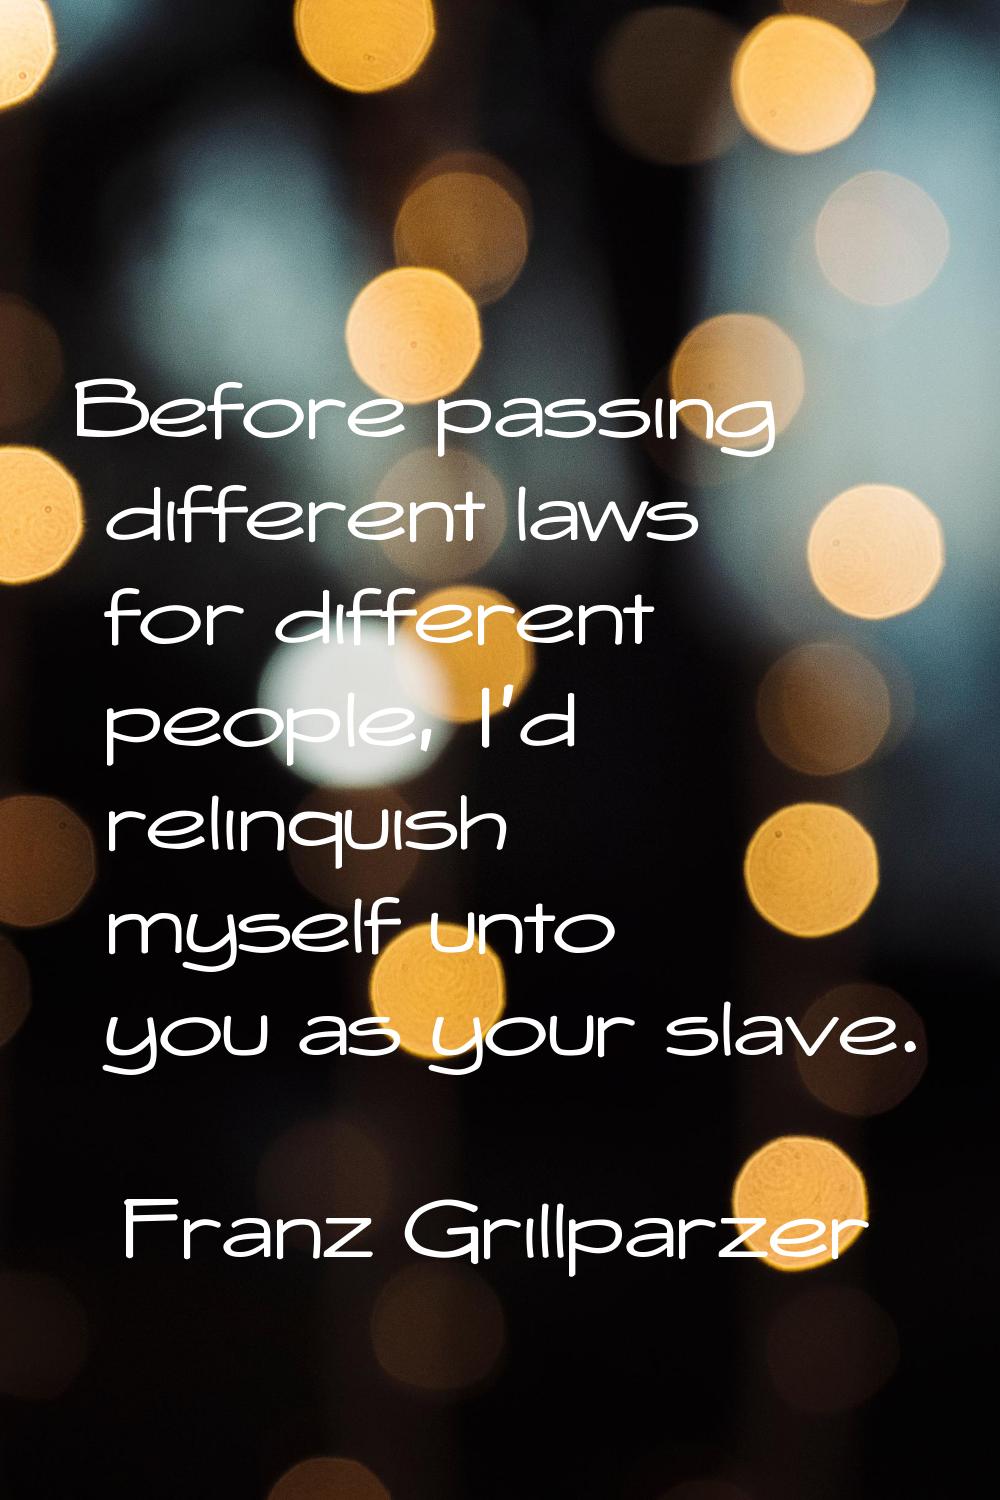 Before passing different laws for different people, I'd relinquish myself unto you as your slave.